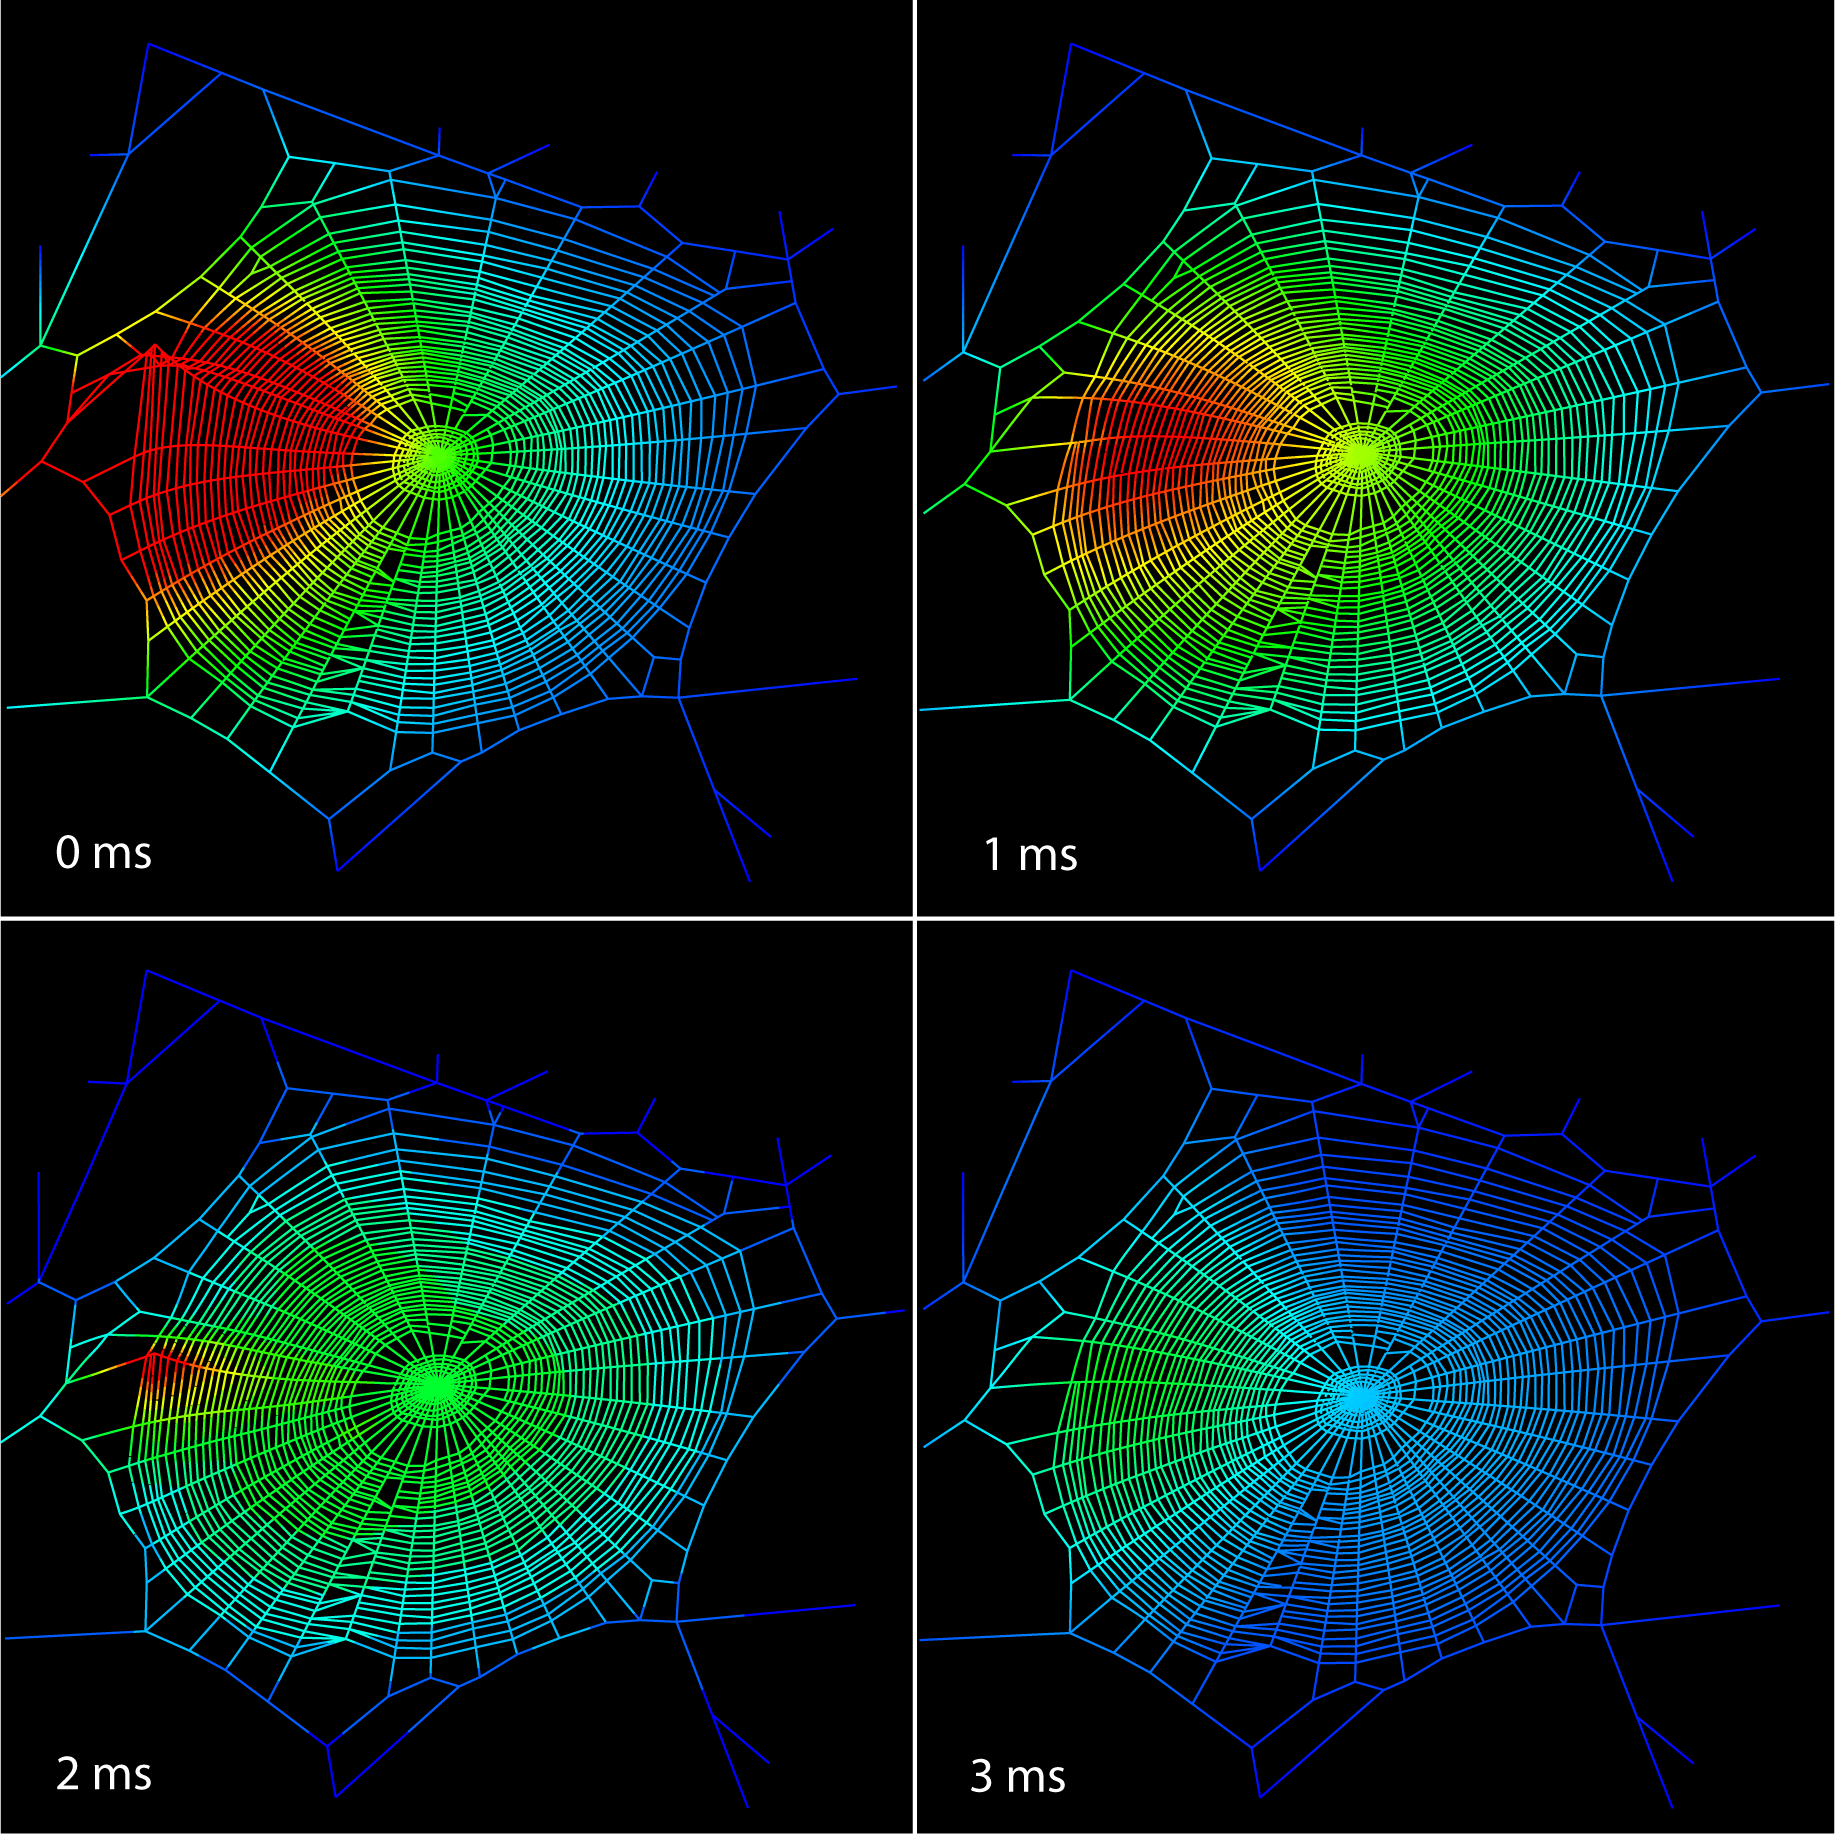 Tuning the instrument: spider webs as vibration transmission structures